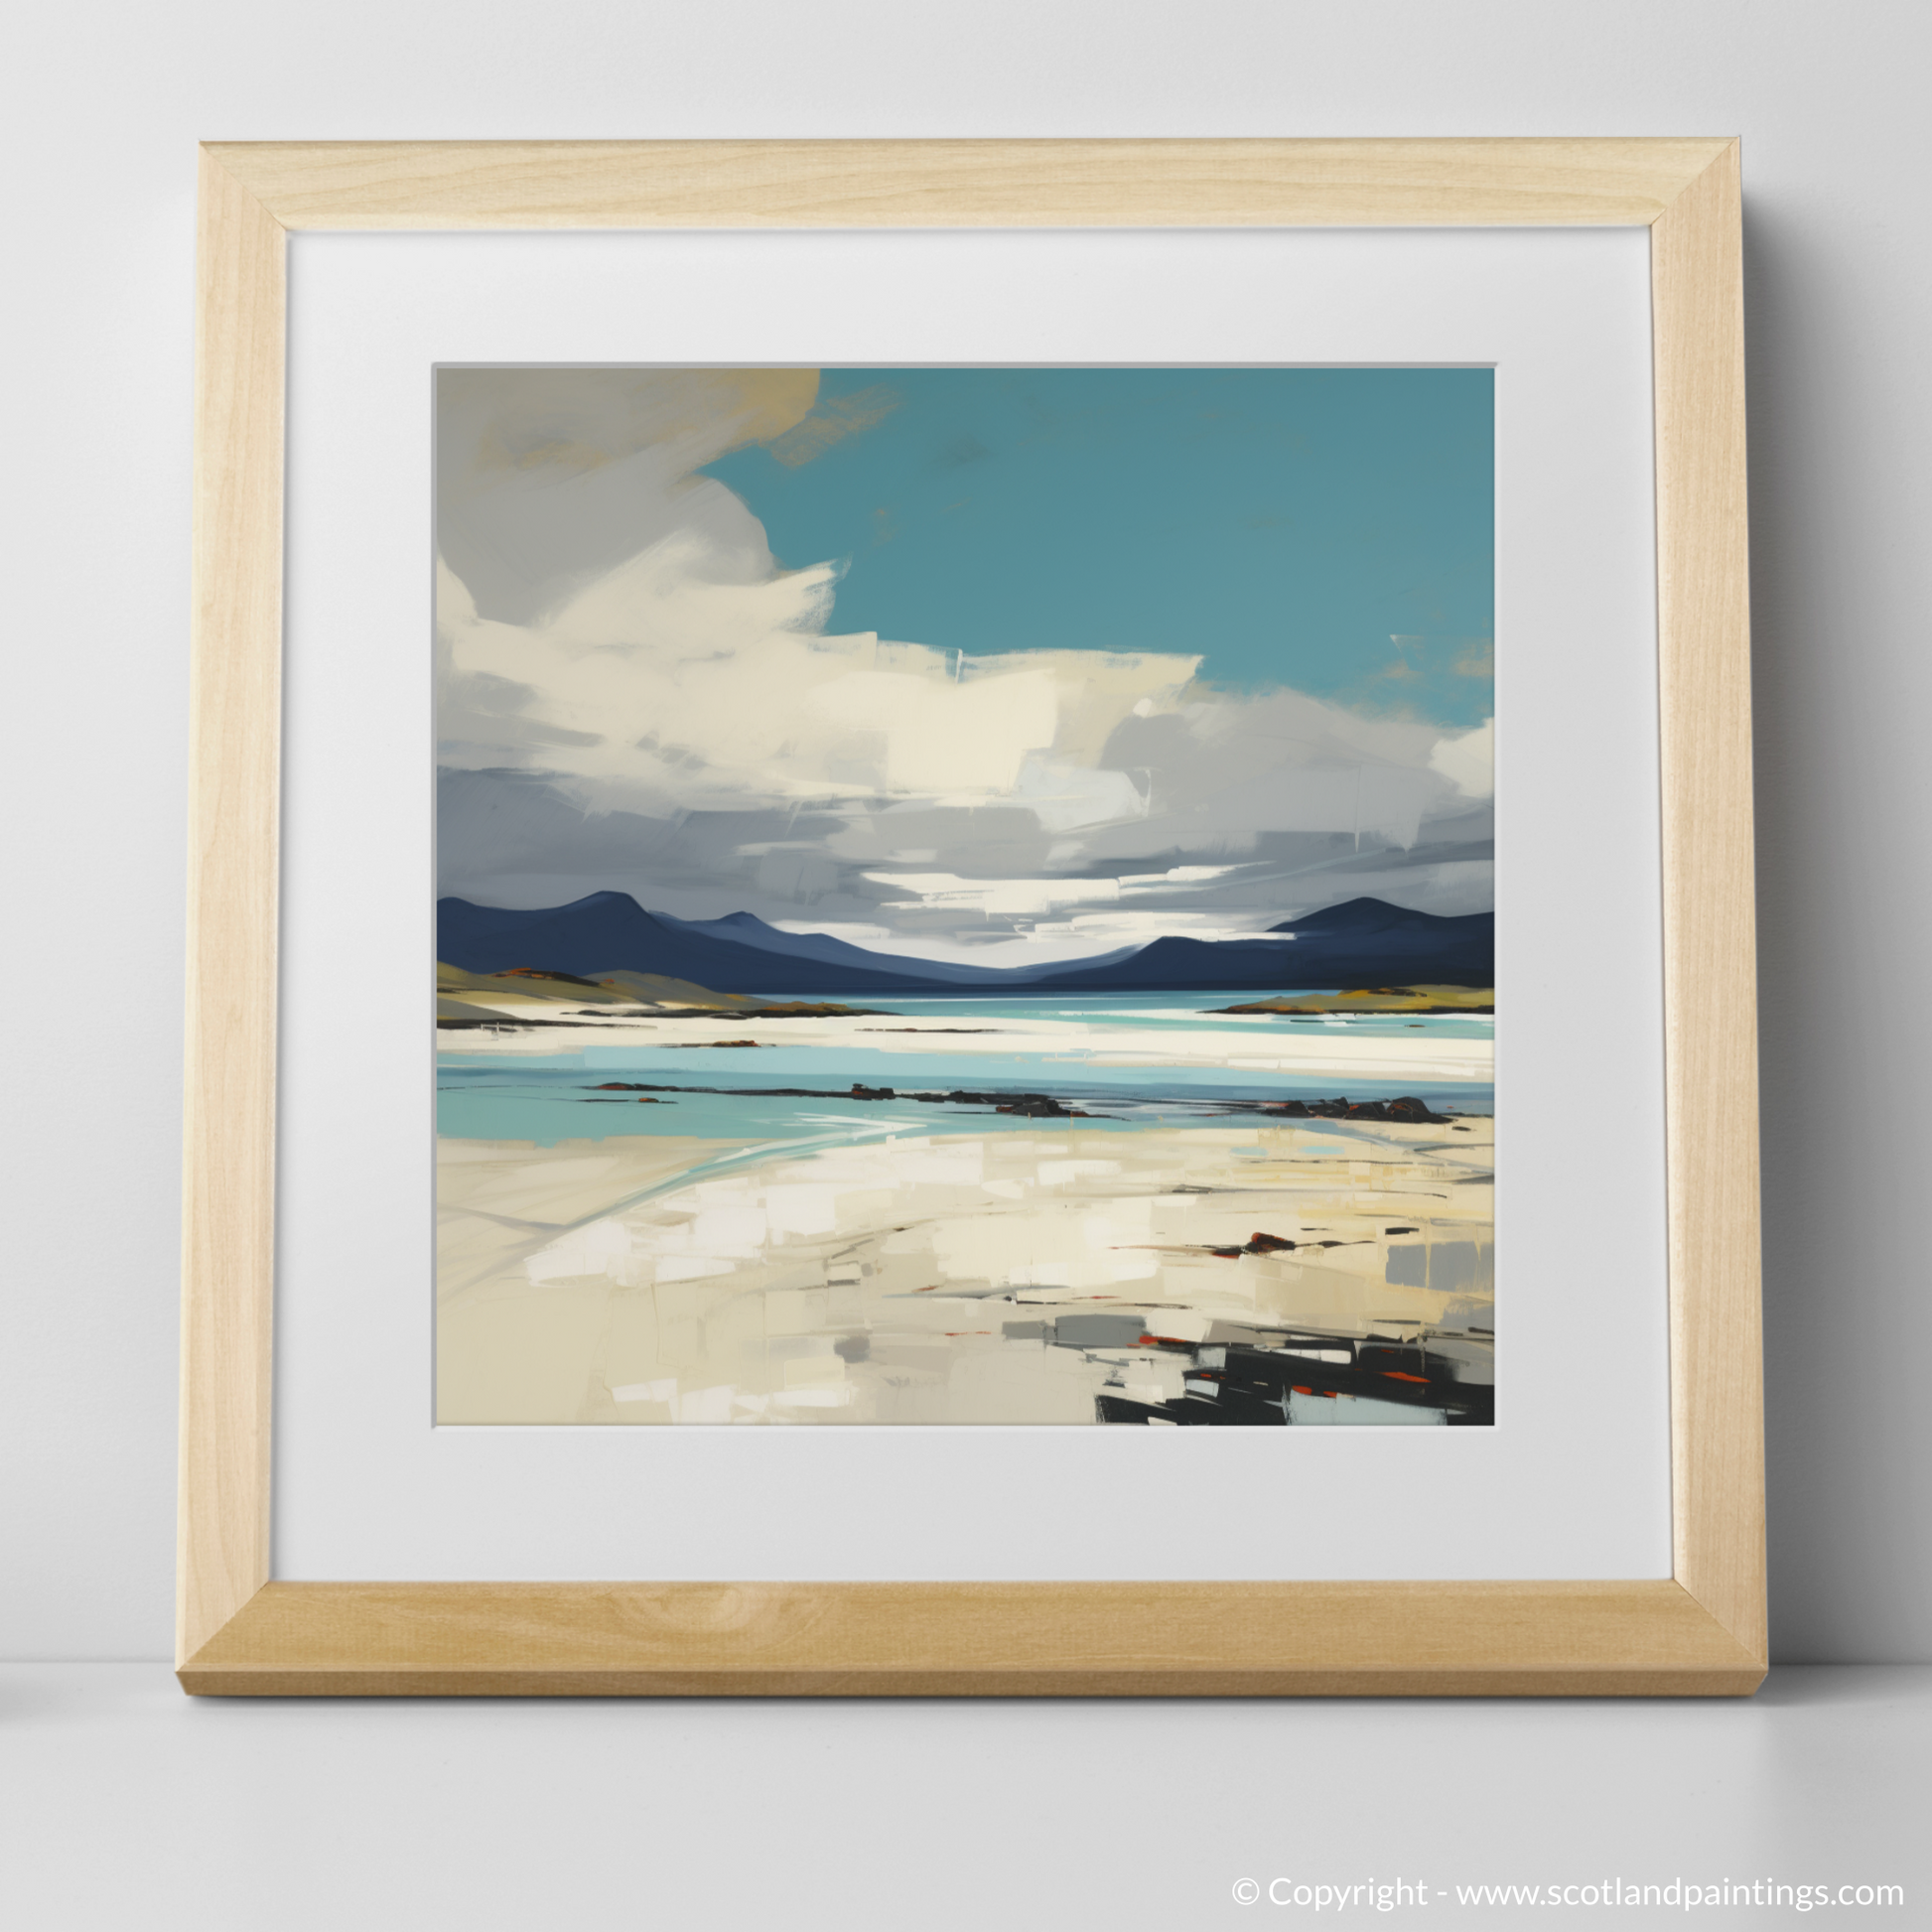 Art Print of Luskentyre Sands on the Isle of Harris with a natural frame